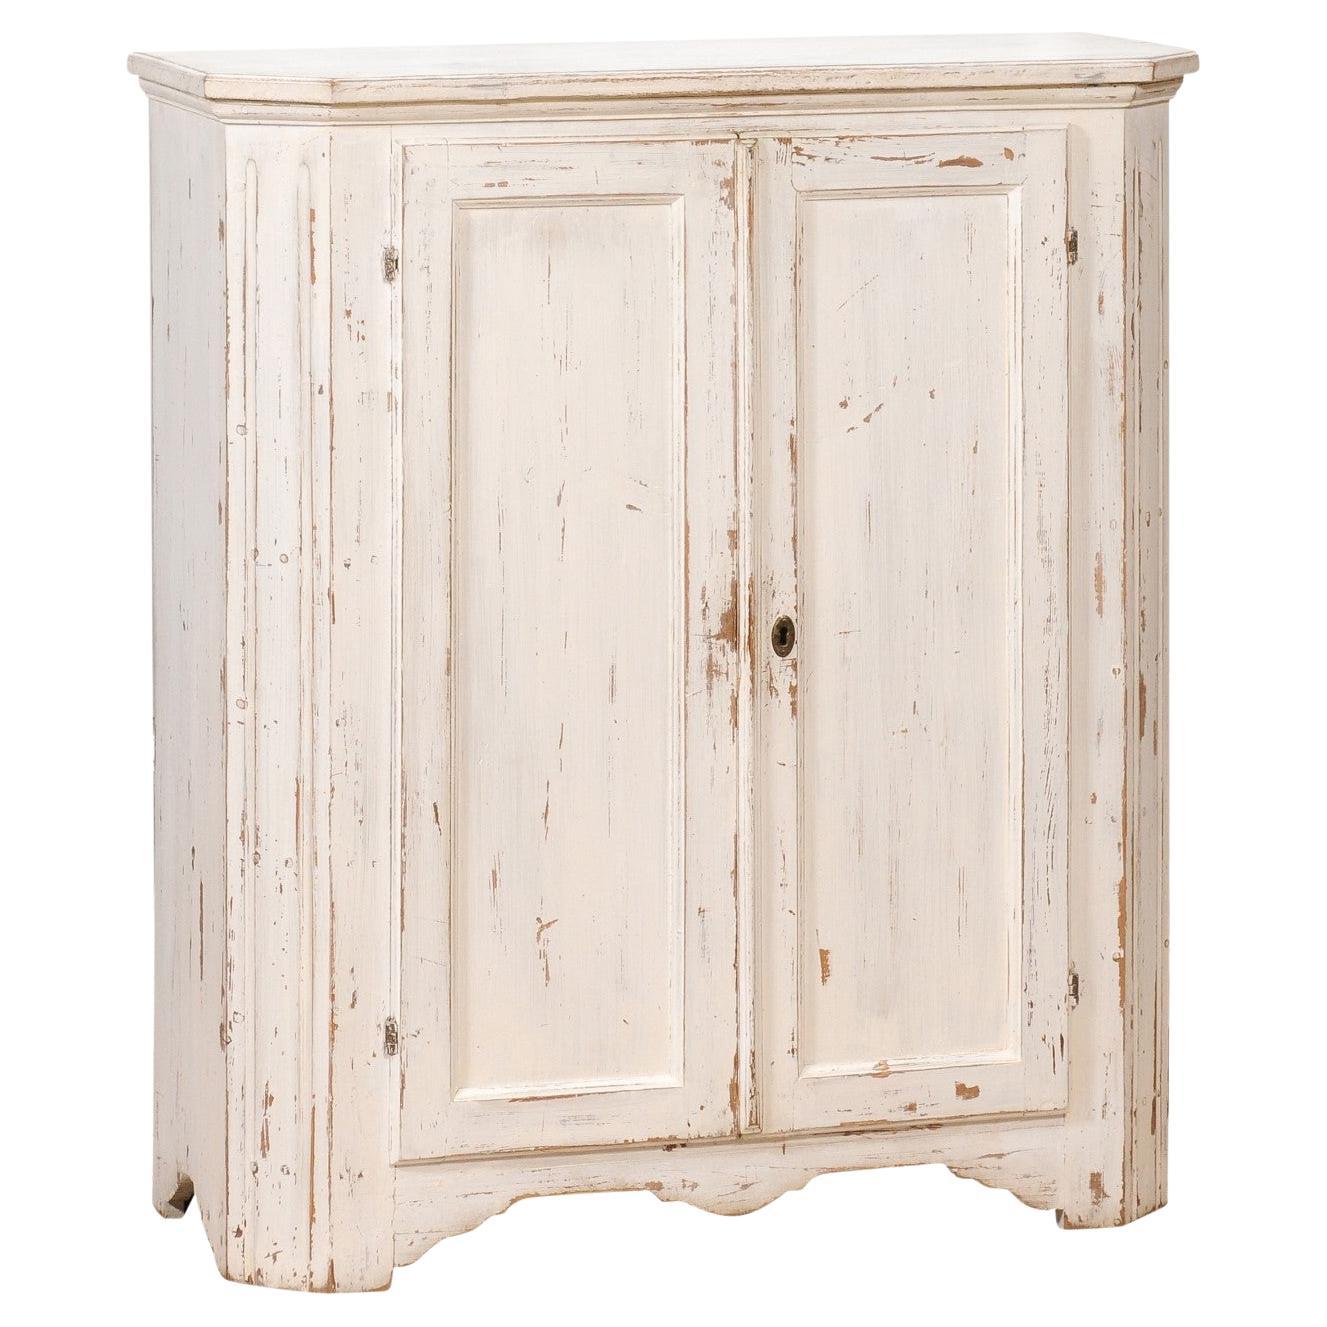 1830s Swedish Off-White Painted Wood Narrow Sideboard mit Distressed Finish